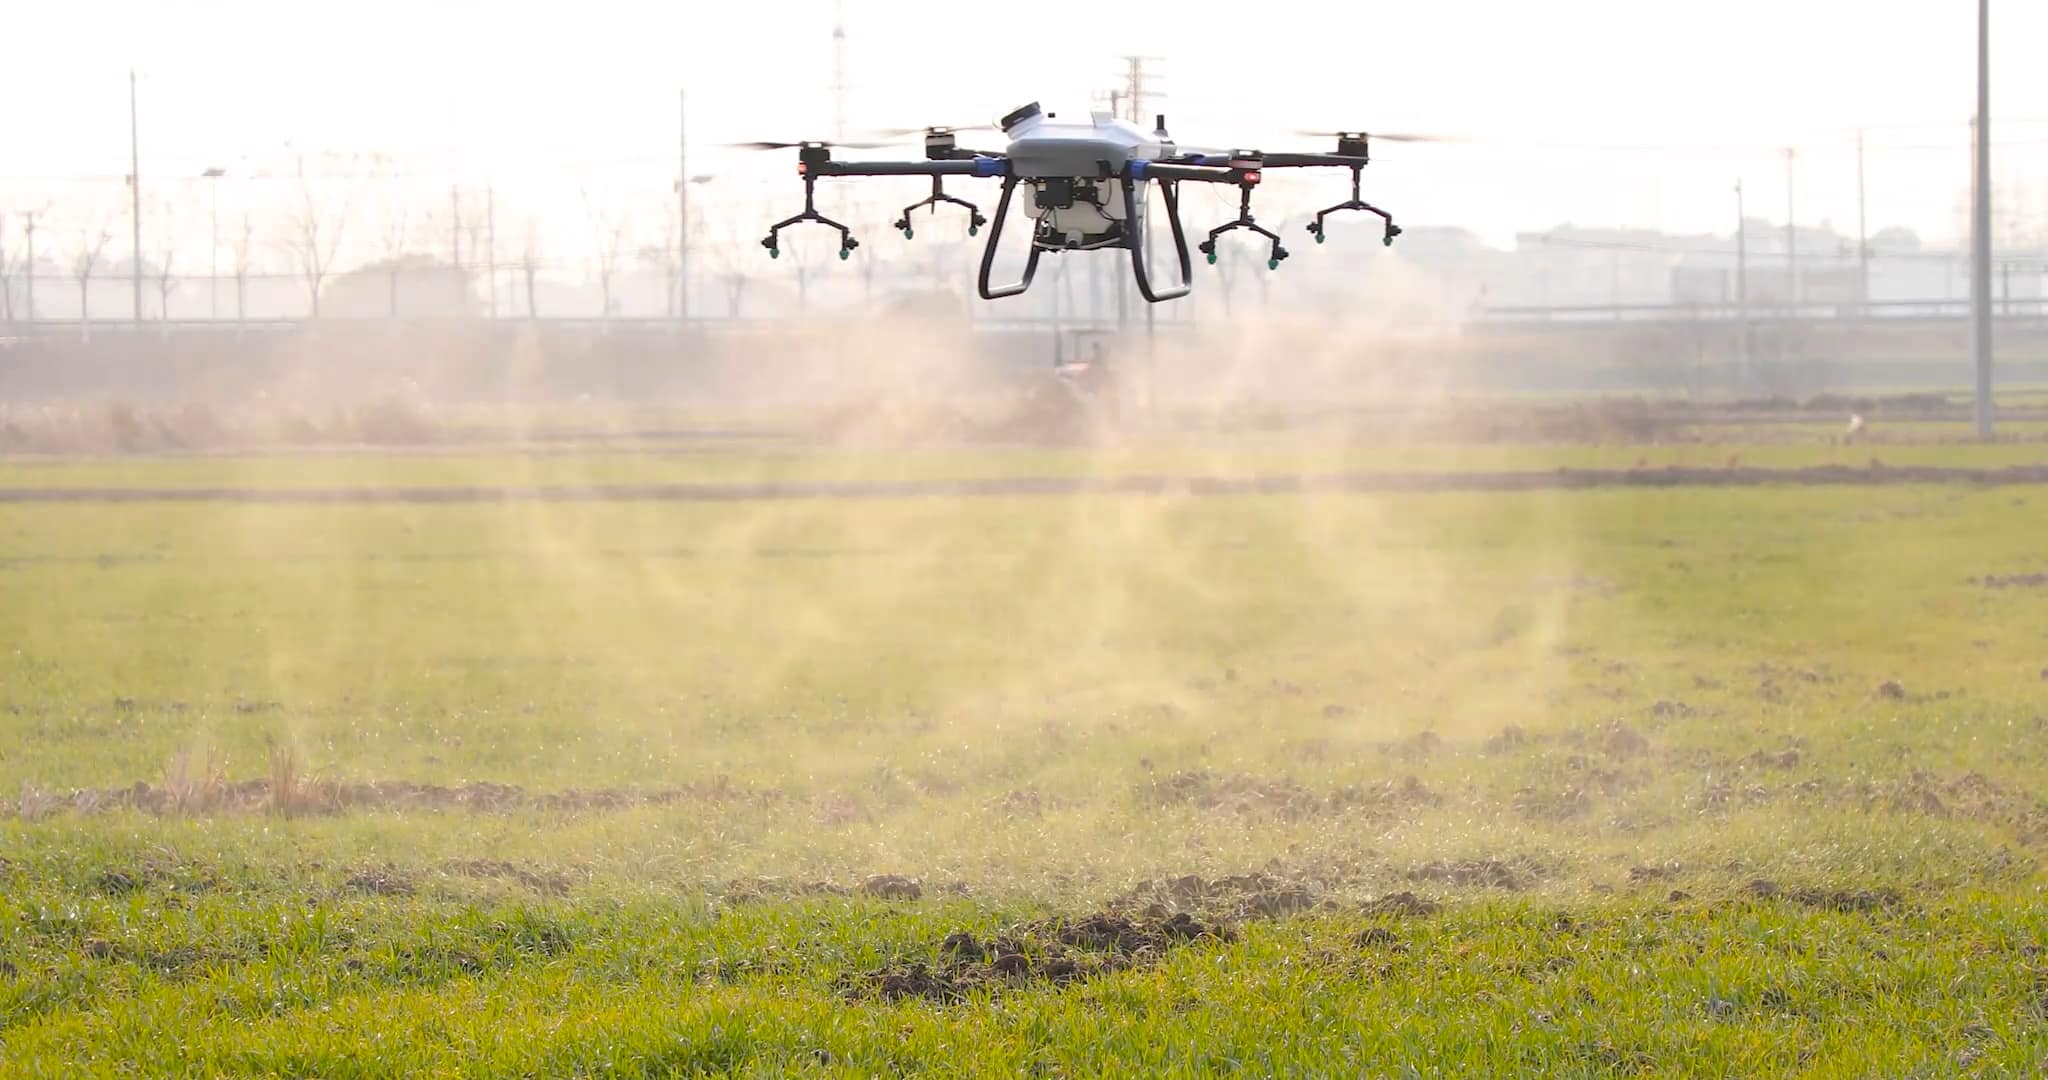 With a spray width of 5-7 meters and a maximum flow rate of 5.4L/min, our FP150 agriculture drone can cover up to 8.67 ha/hour. Its precision spraying and no leakage design ensures efficient and uniform coverage for your crops.